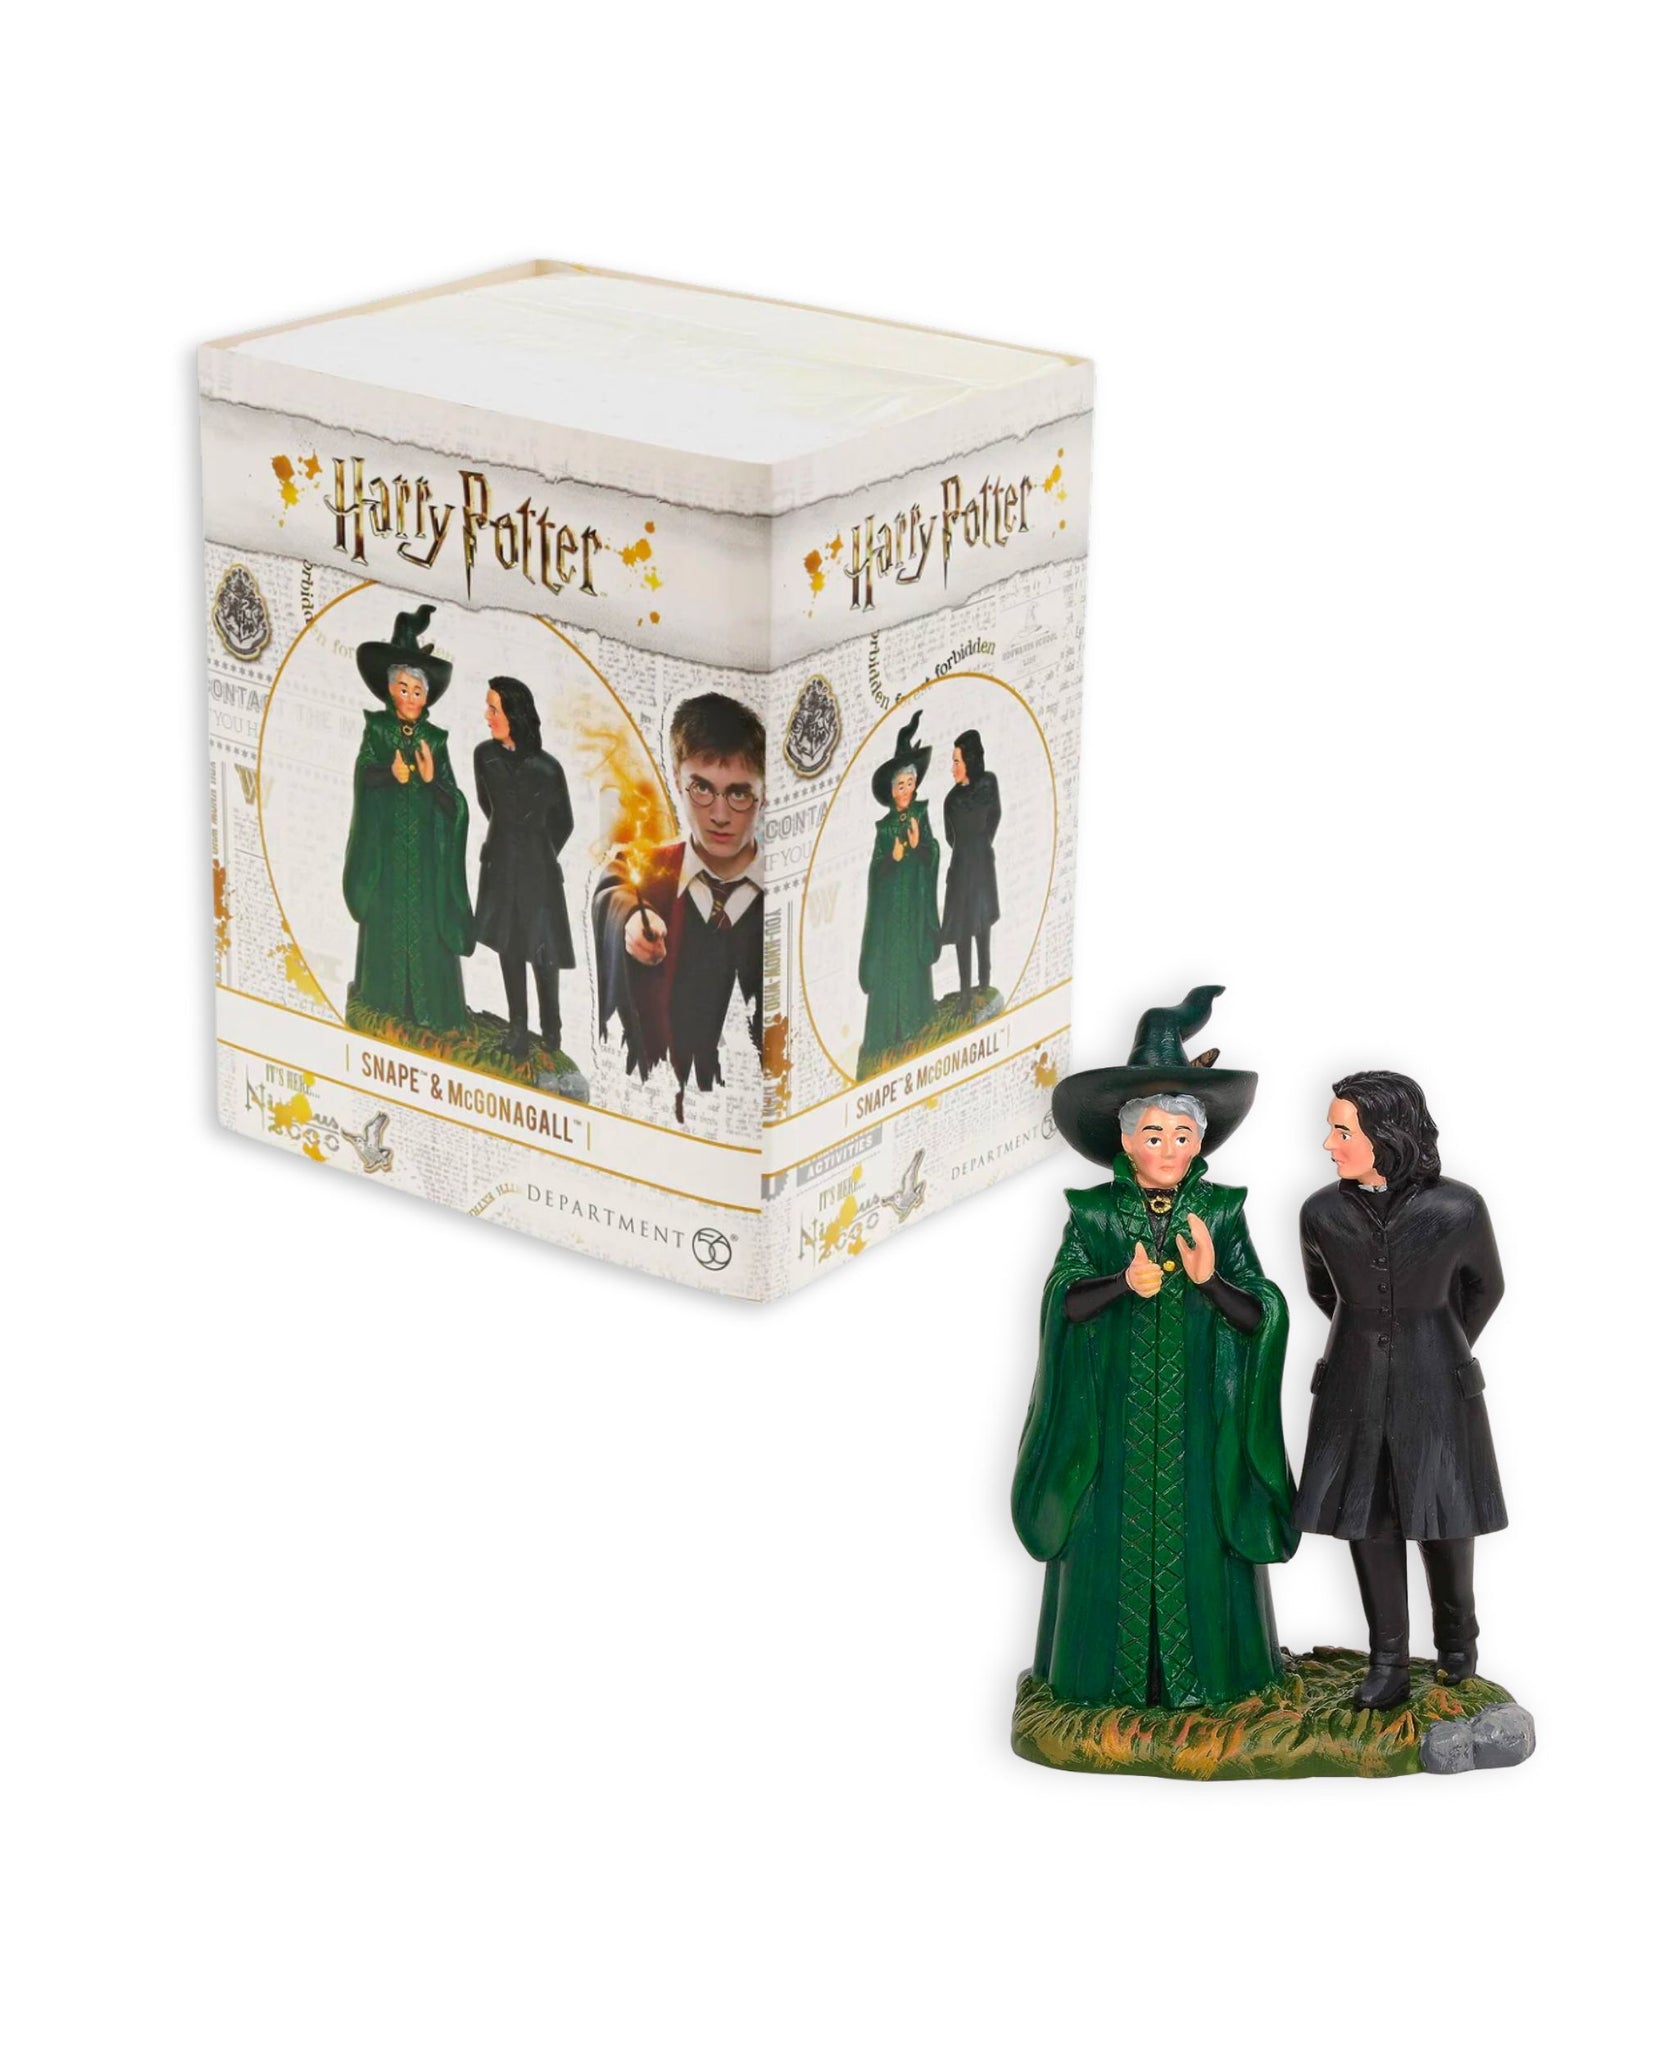 McGonagall and Snape - Harry Potter Village by Department 56